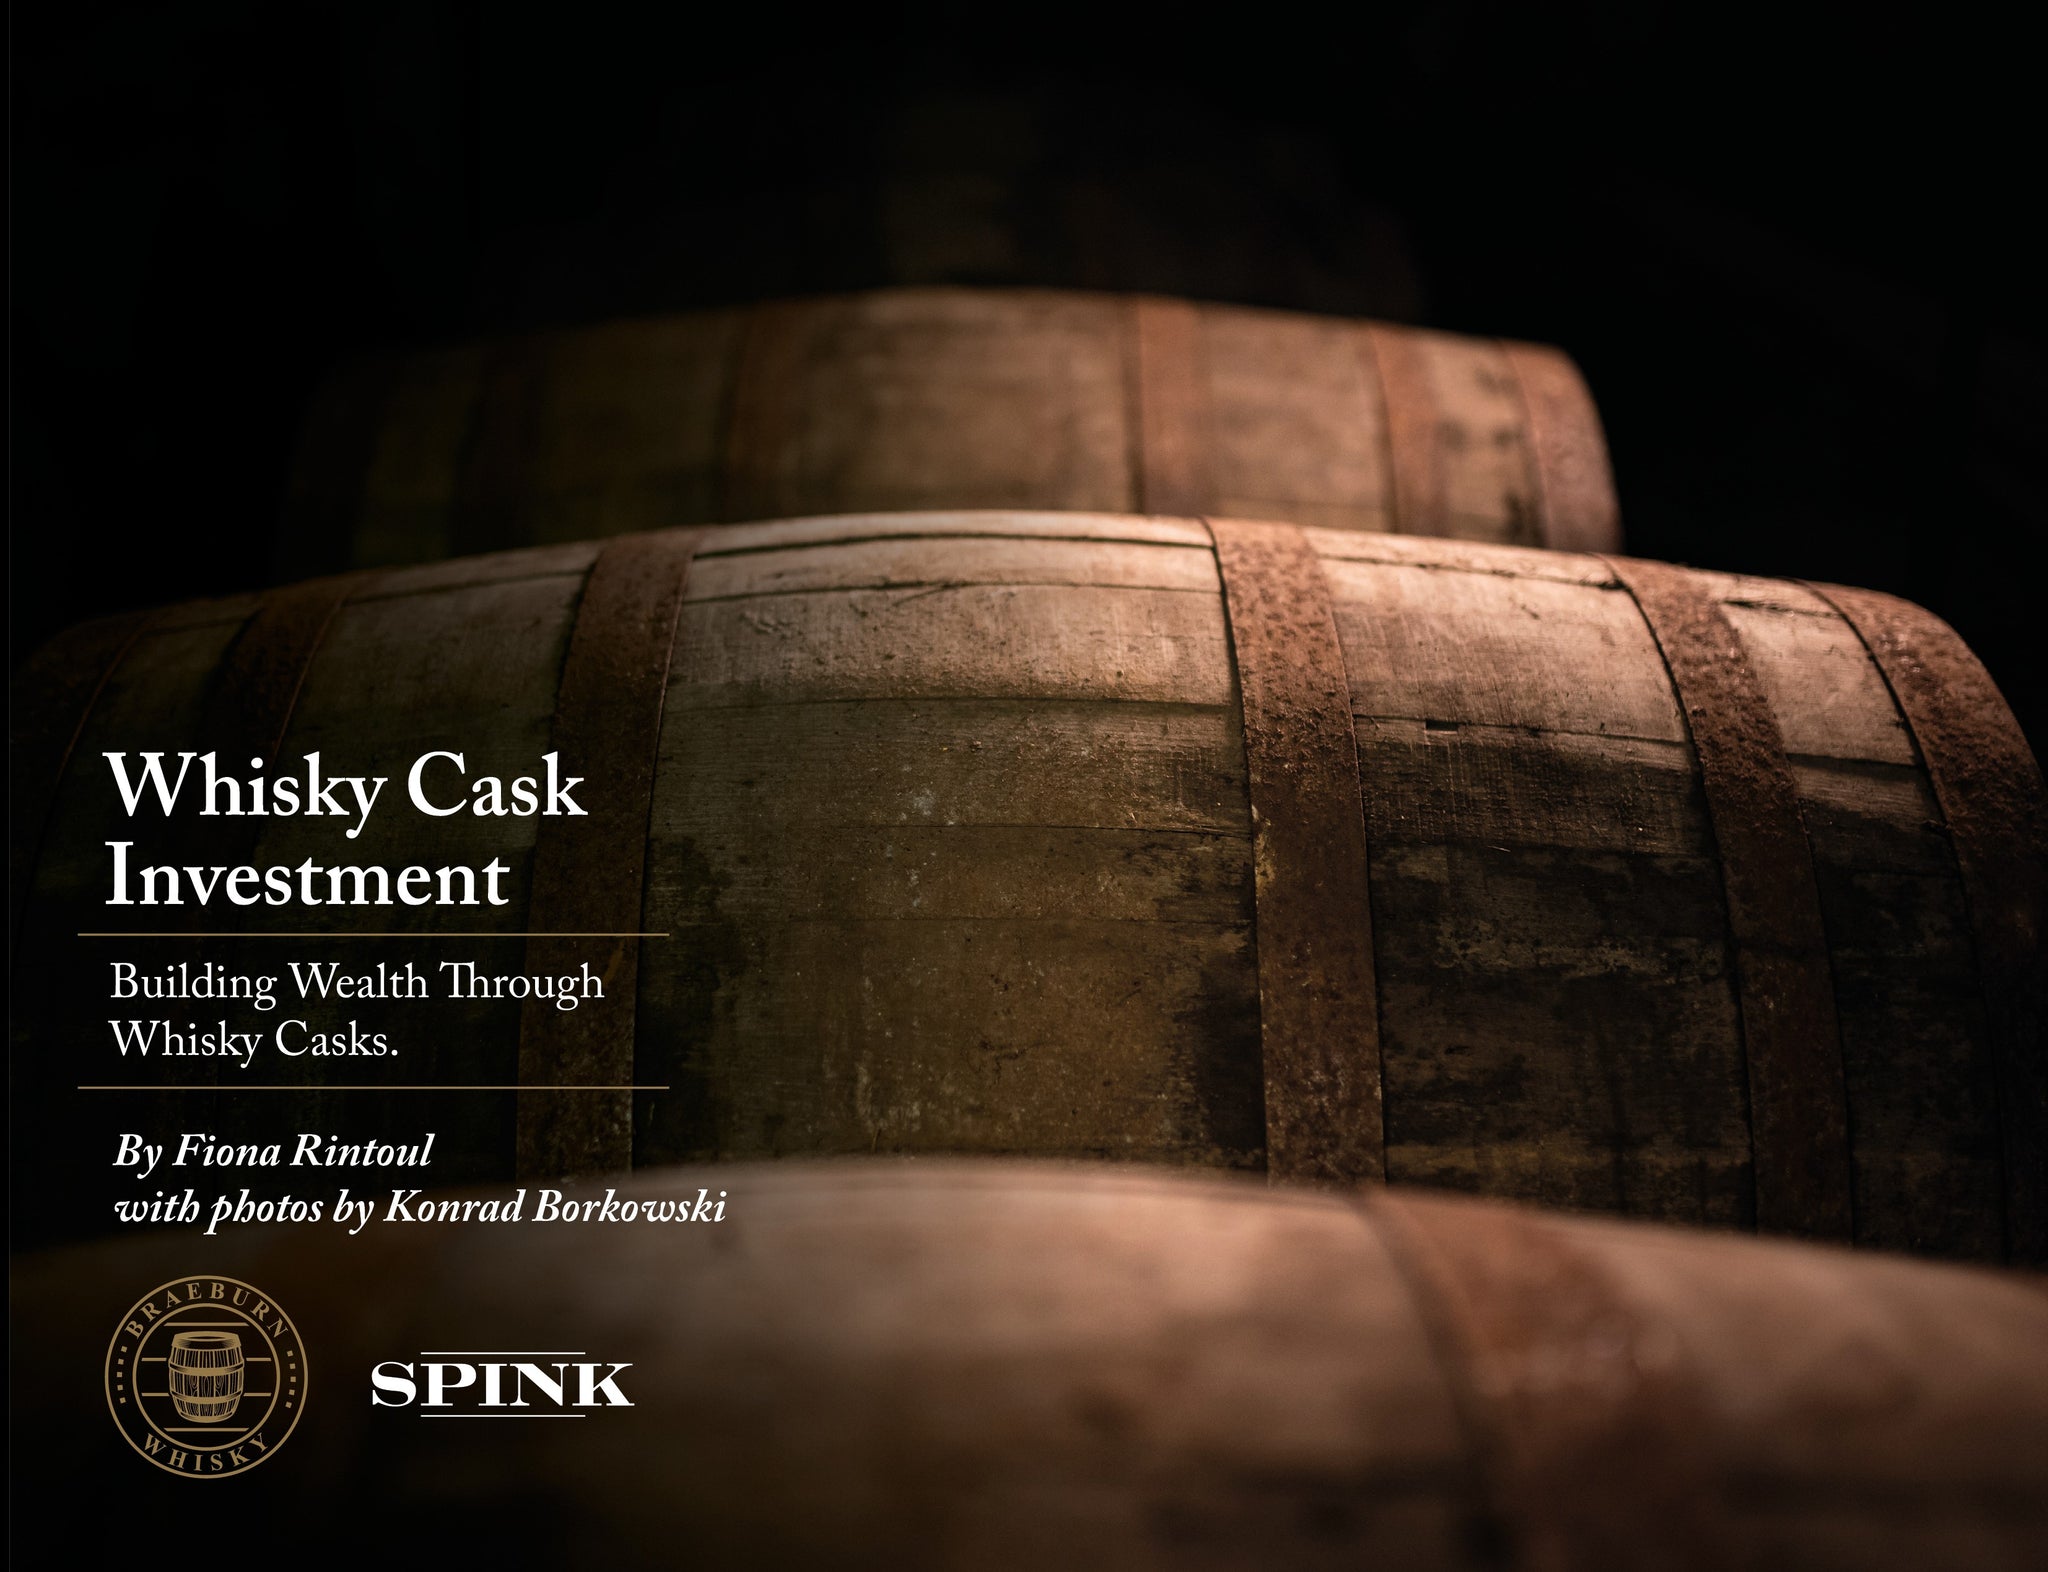 Whisky Cask Investment: Building Wealth Through Whisky Casks by Fiona Rintoul (downloadable PDF)